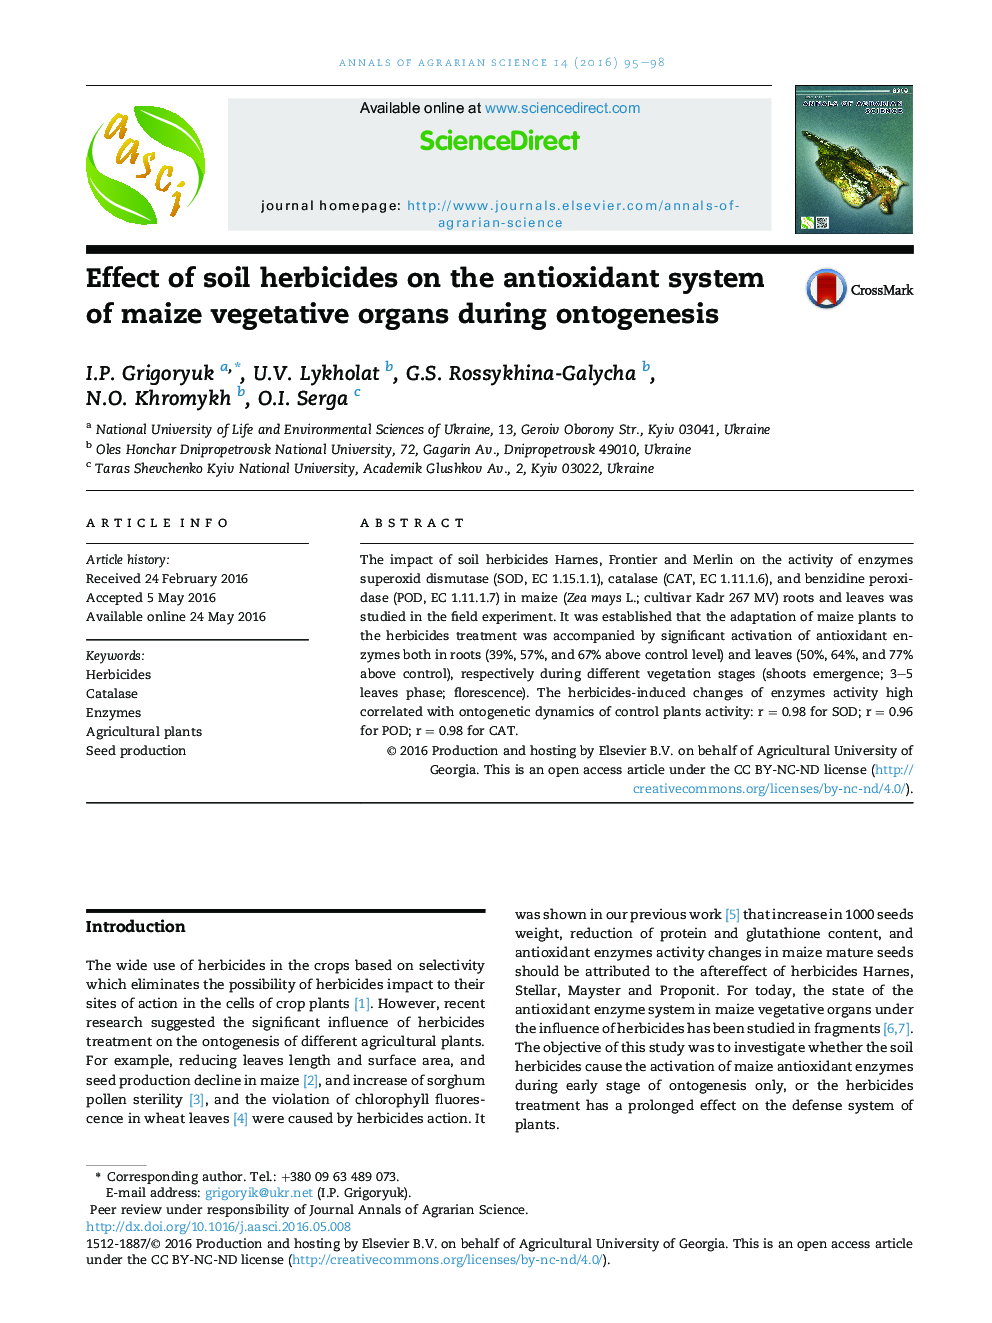 Effect of soil herbicides on the antioxidant system of maize vegetative organs during ontogenesis 